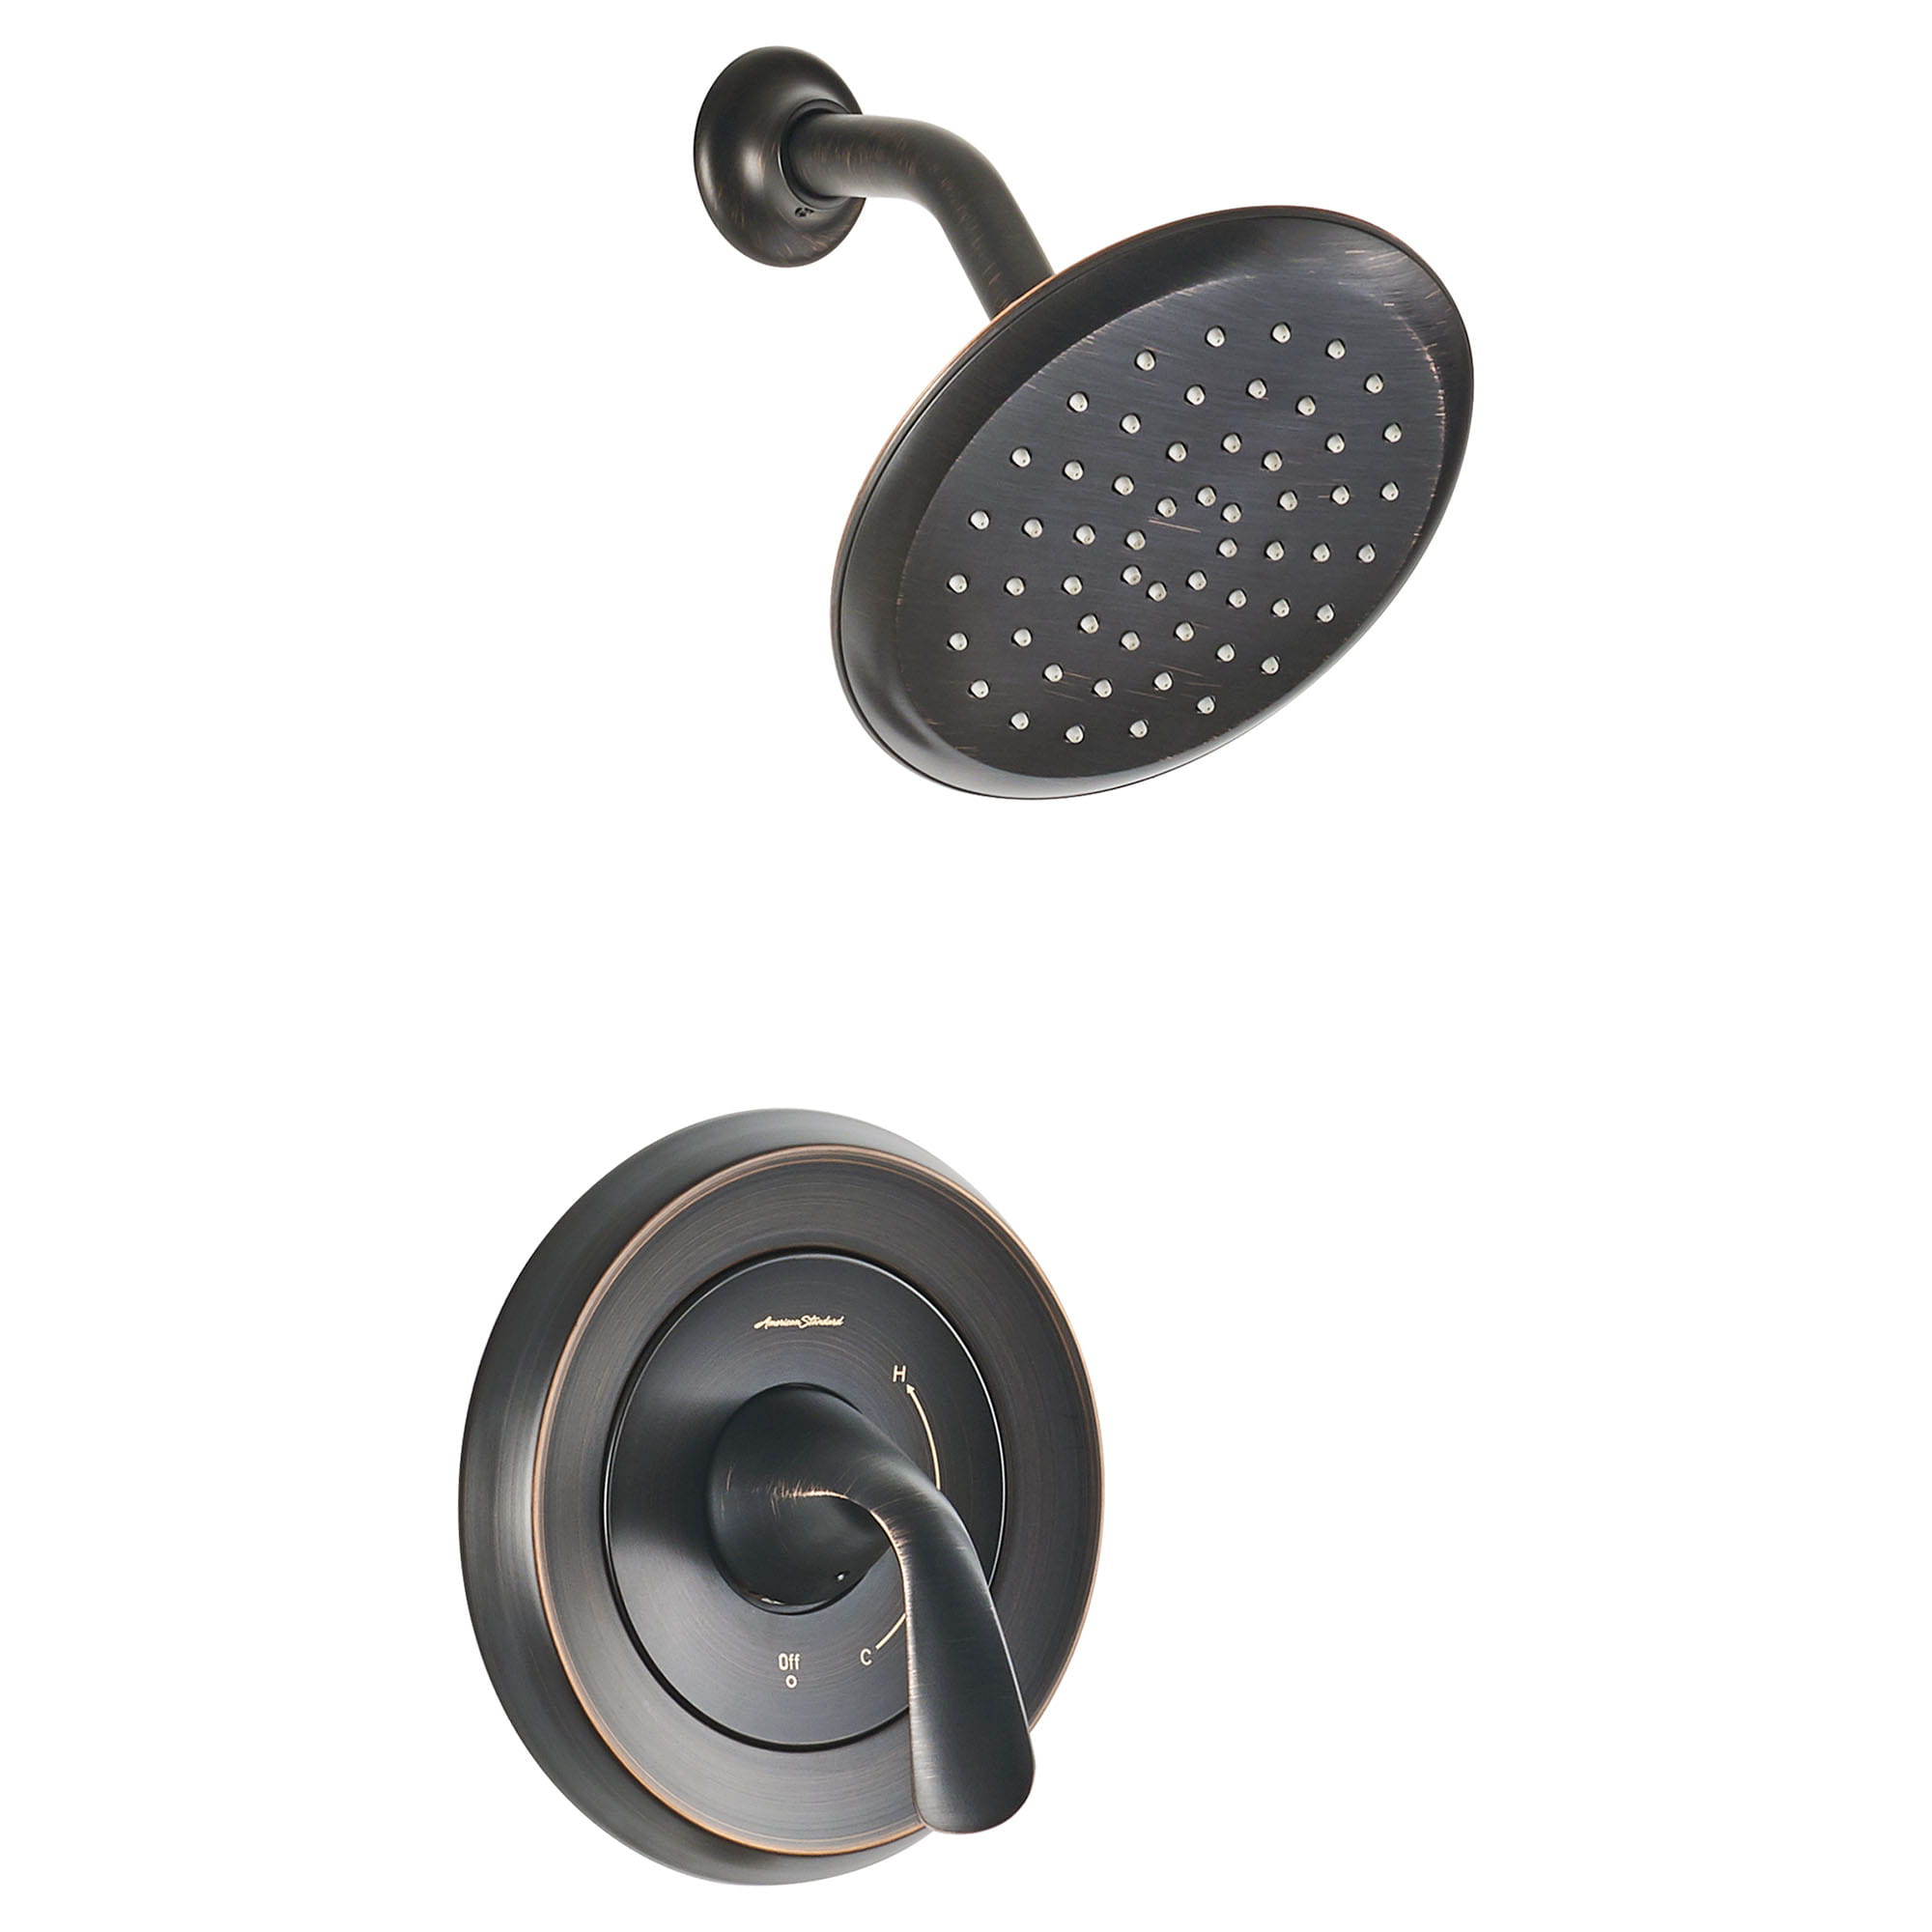 Fluent 25 gpm 95 L min Shower Trim Kit With Double Ceramic Pressure Balance Cartridge With Lever Handle LEGACY BRONZE